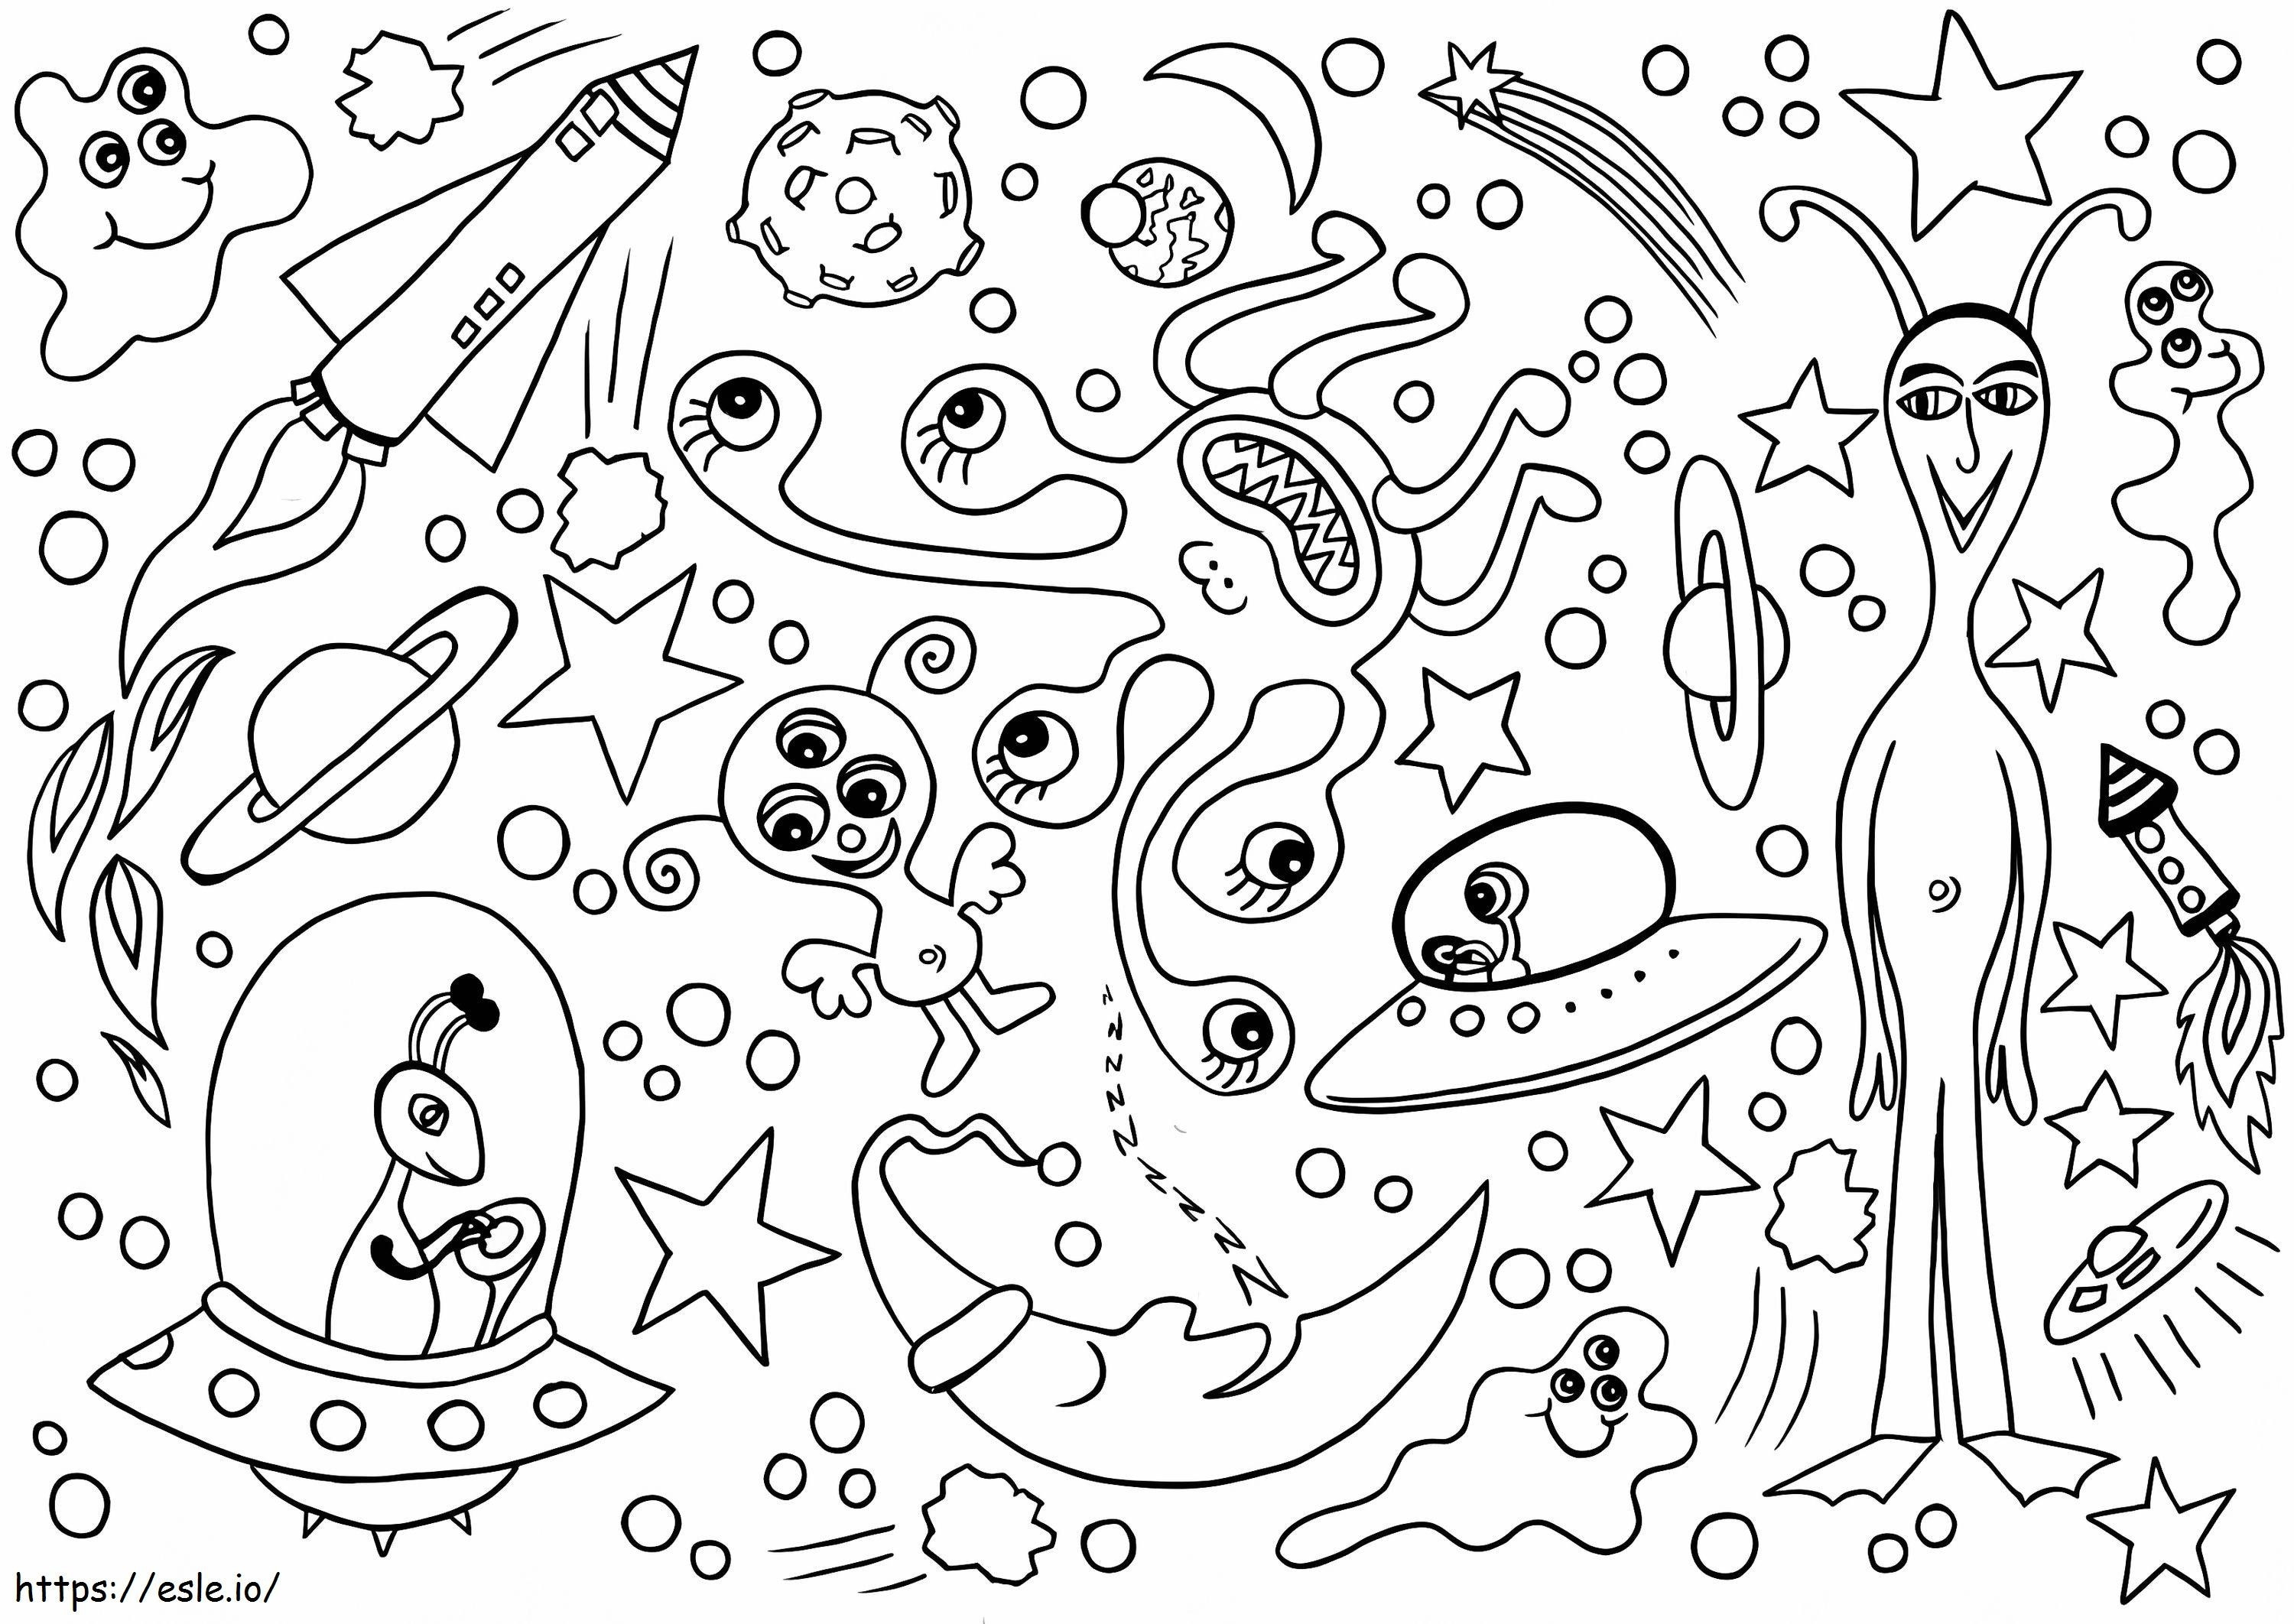 Space Aliens coloring page